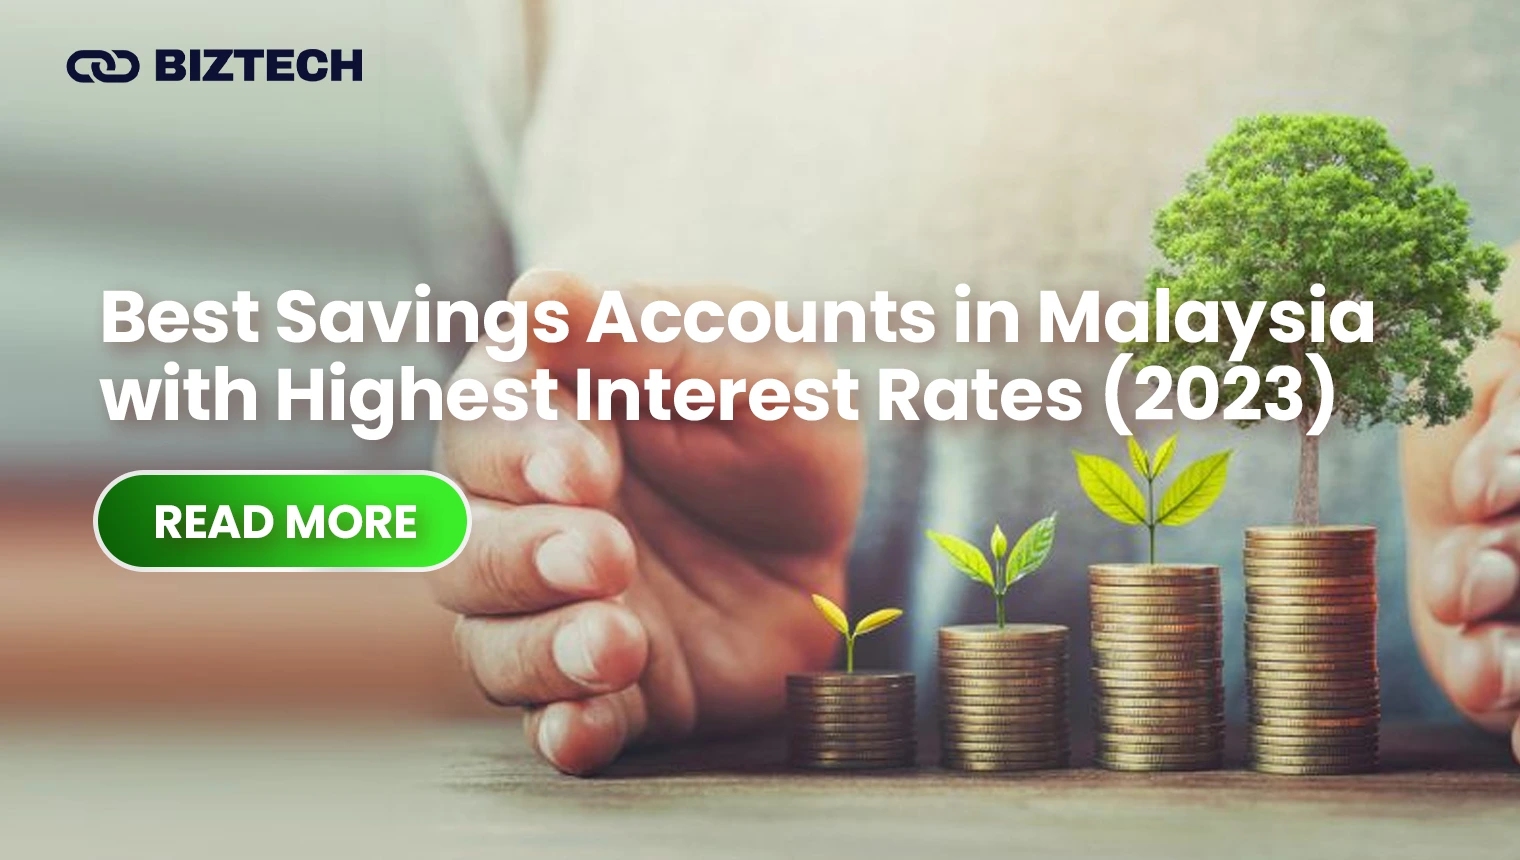 Best Savings Accounts in Malaysia with Highest Interest Rates (2023)